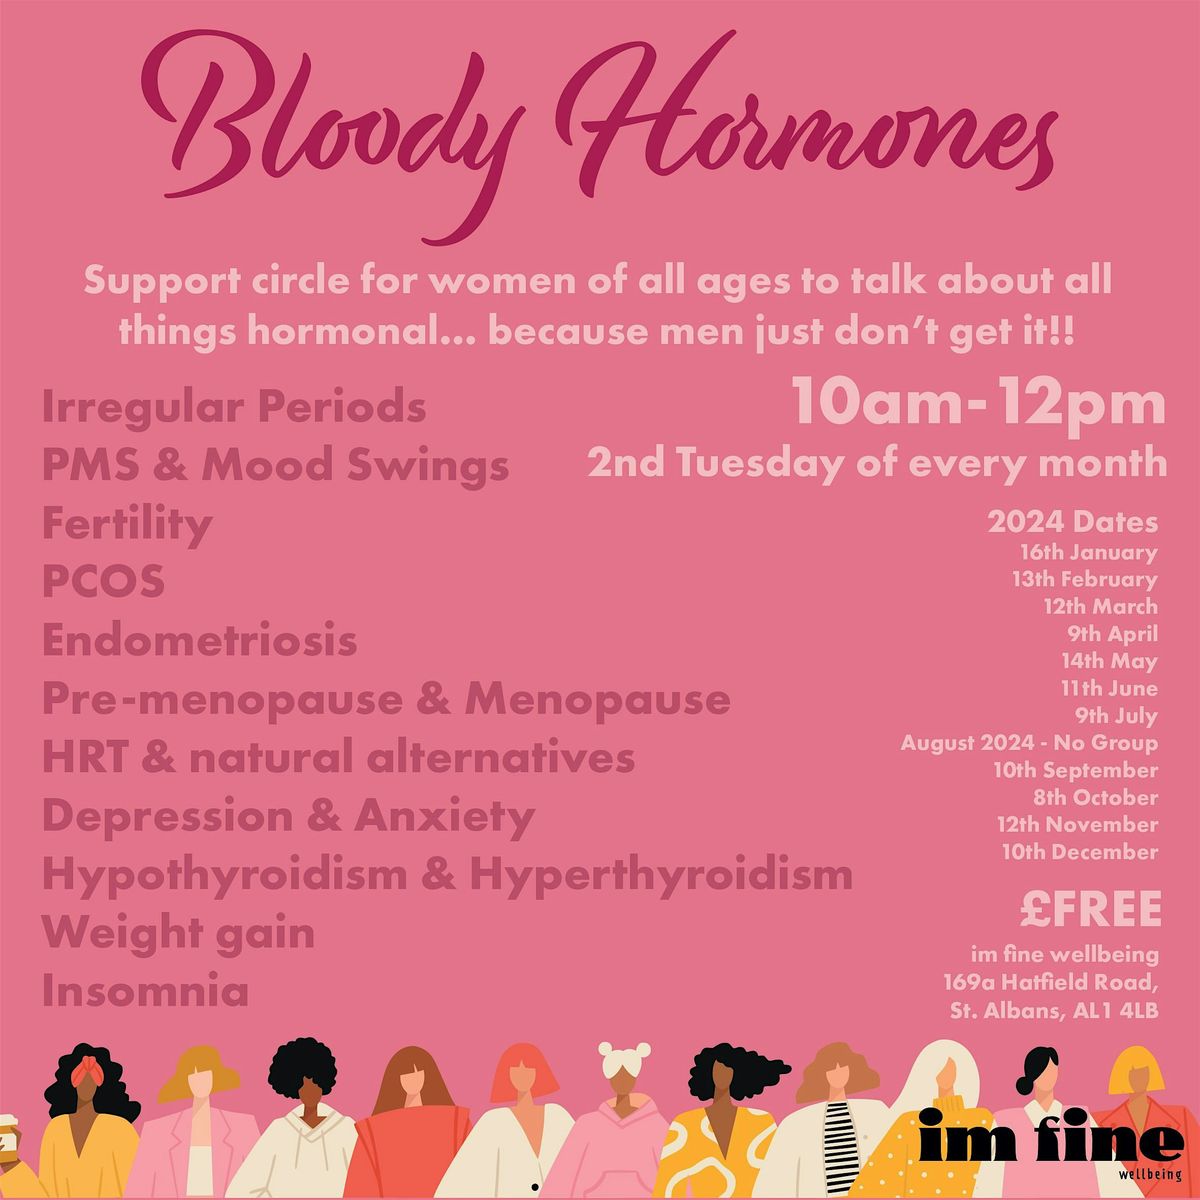 Bloody Hormones - Community Support Group for Women (of all ages!!)